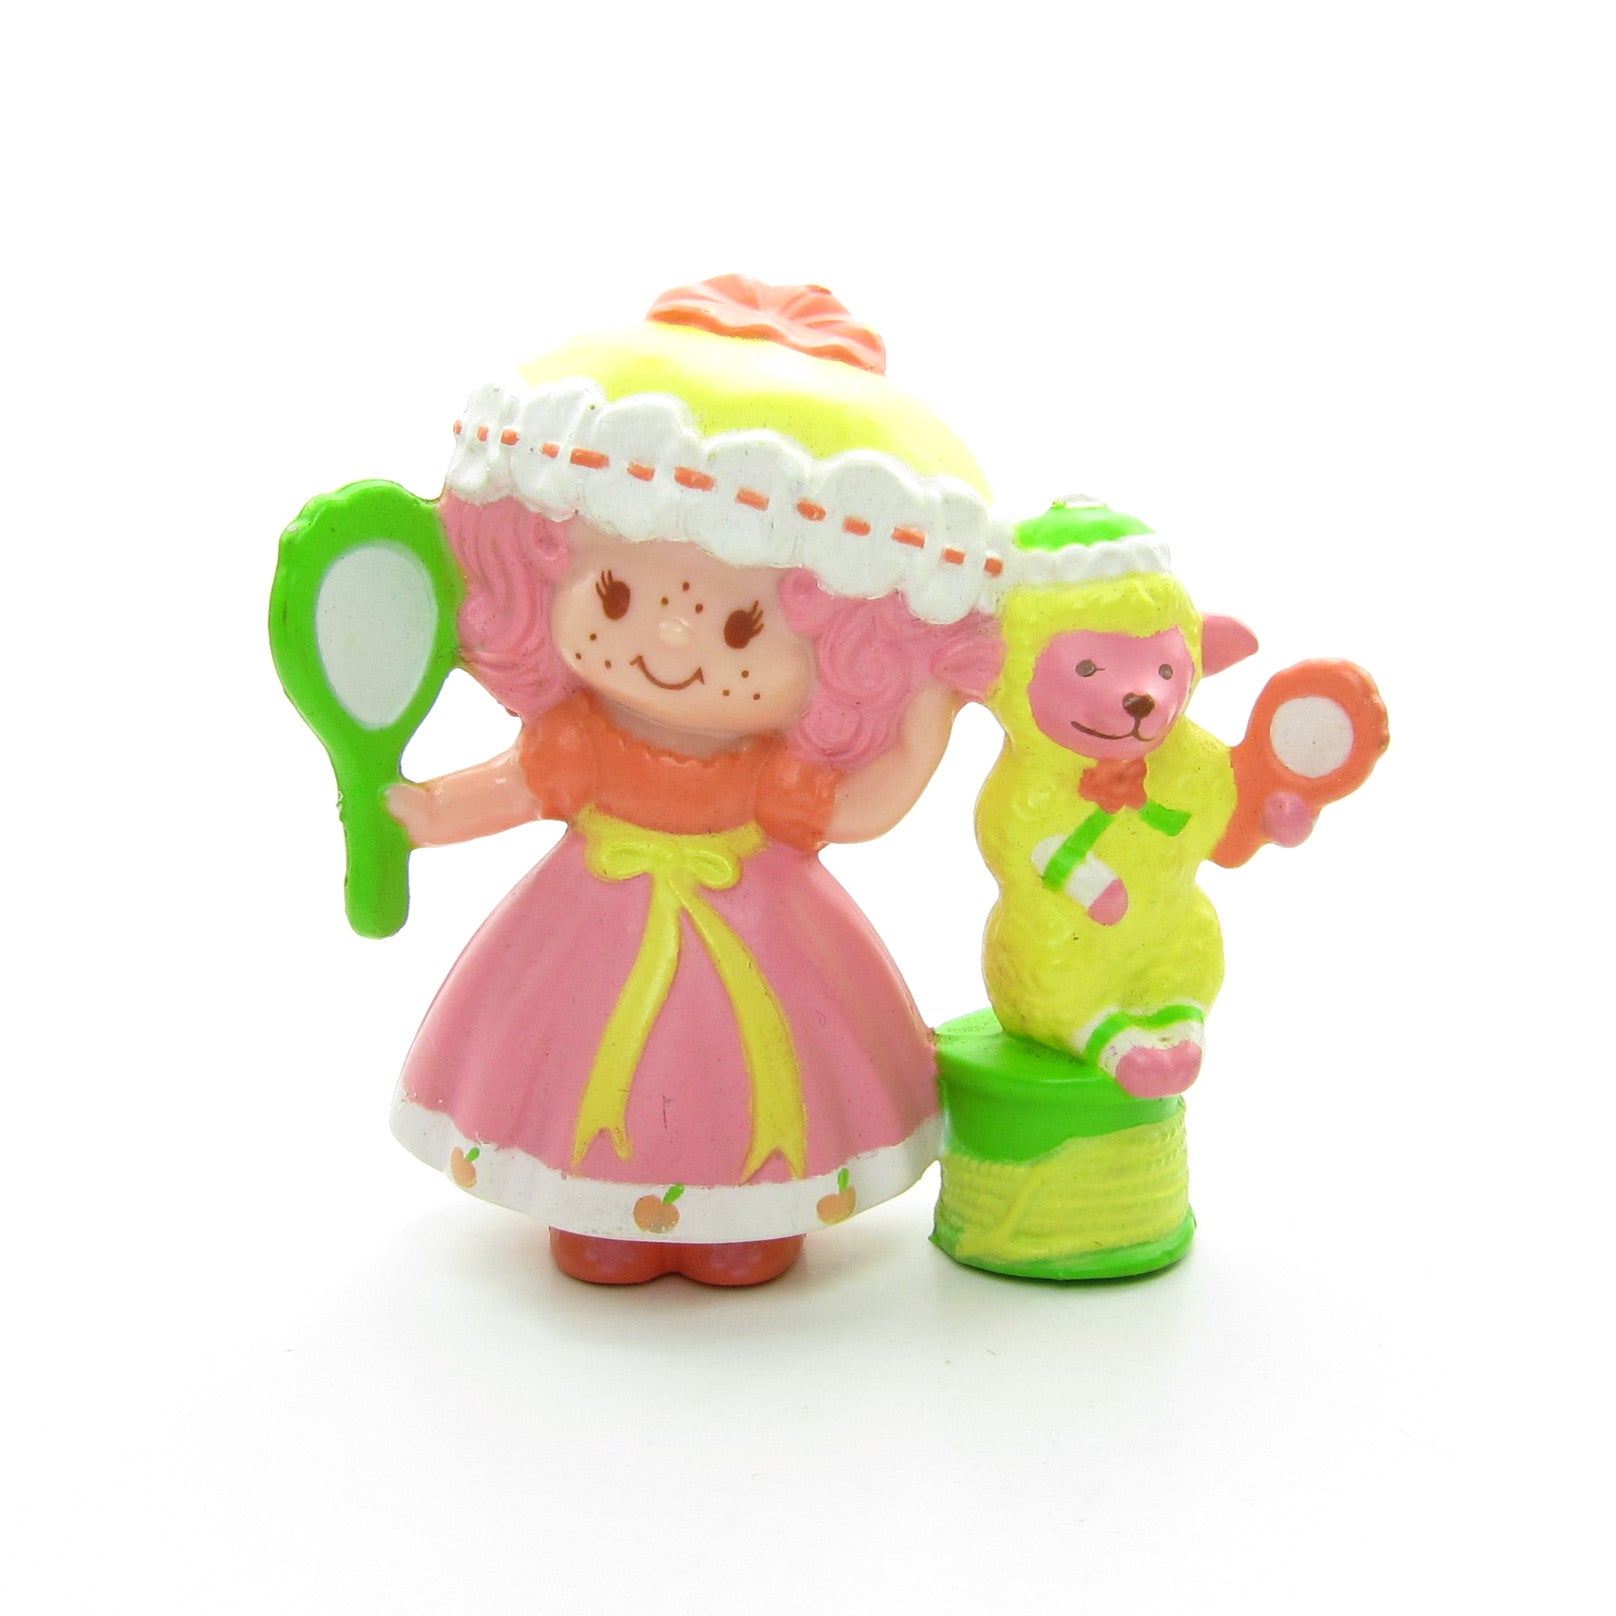 Peach Blush with Melonie Belle Getting Ready for Bed miniature figurine